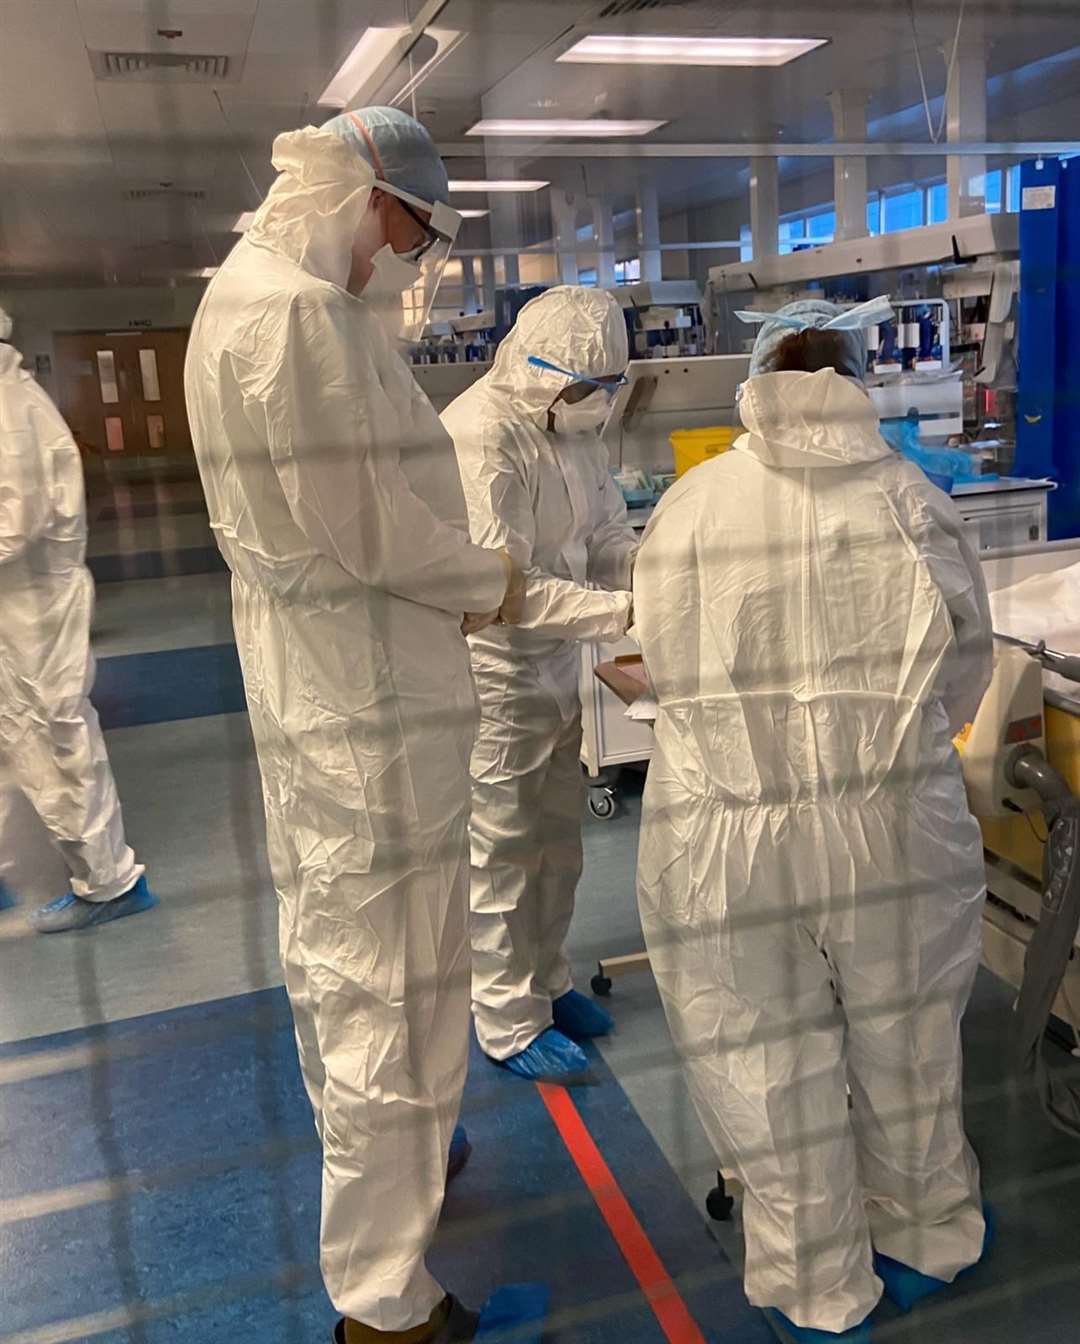 NHS staff at Darent Valley Hospital treating Covid-19 positive patients in PPE